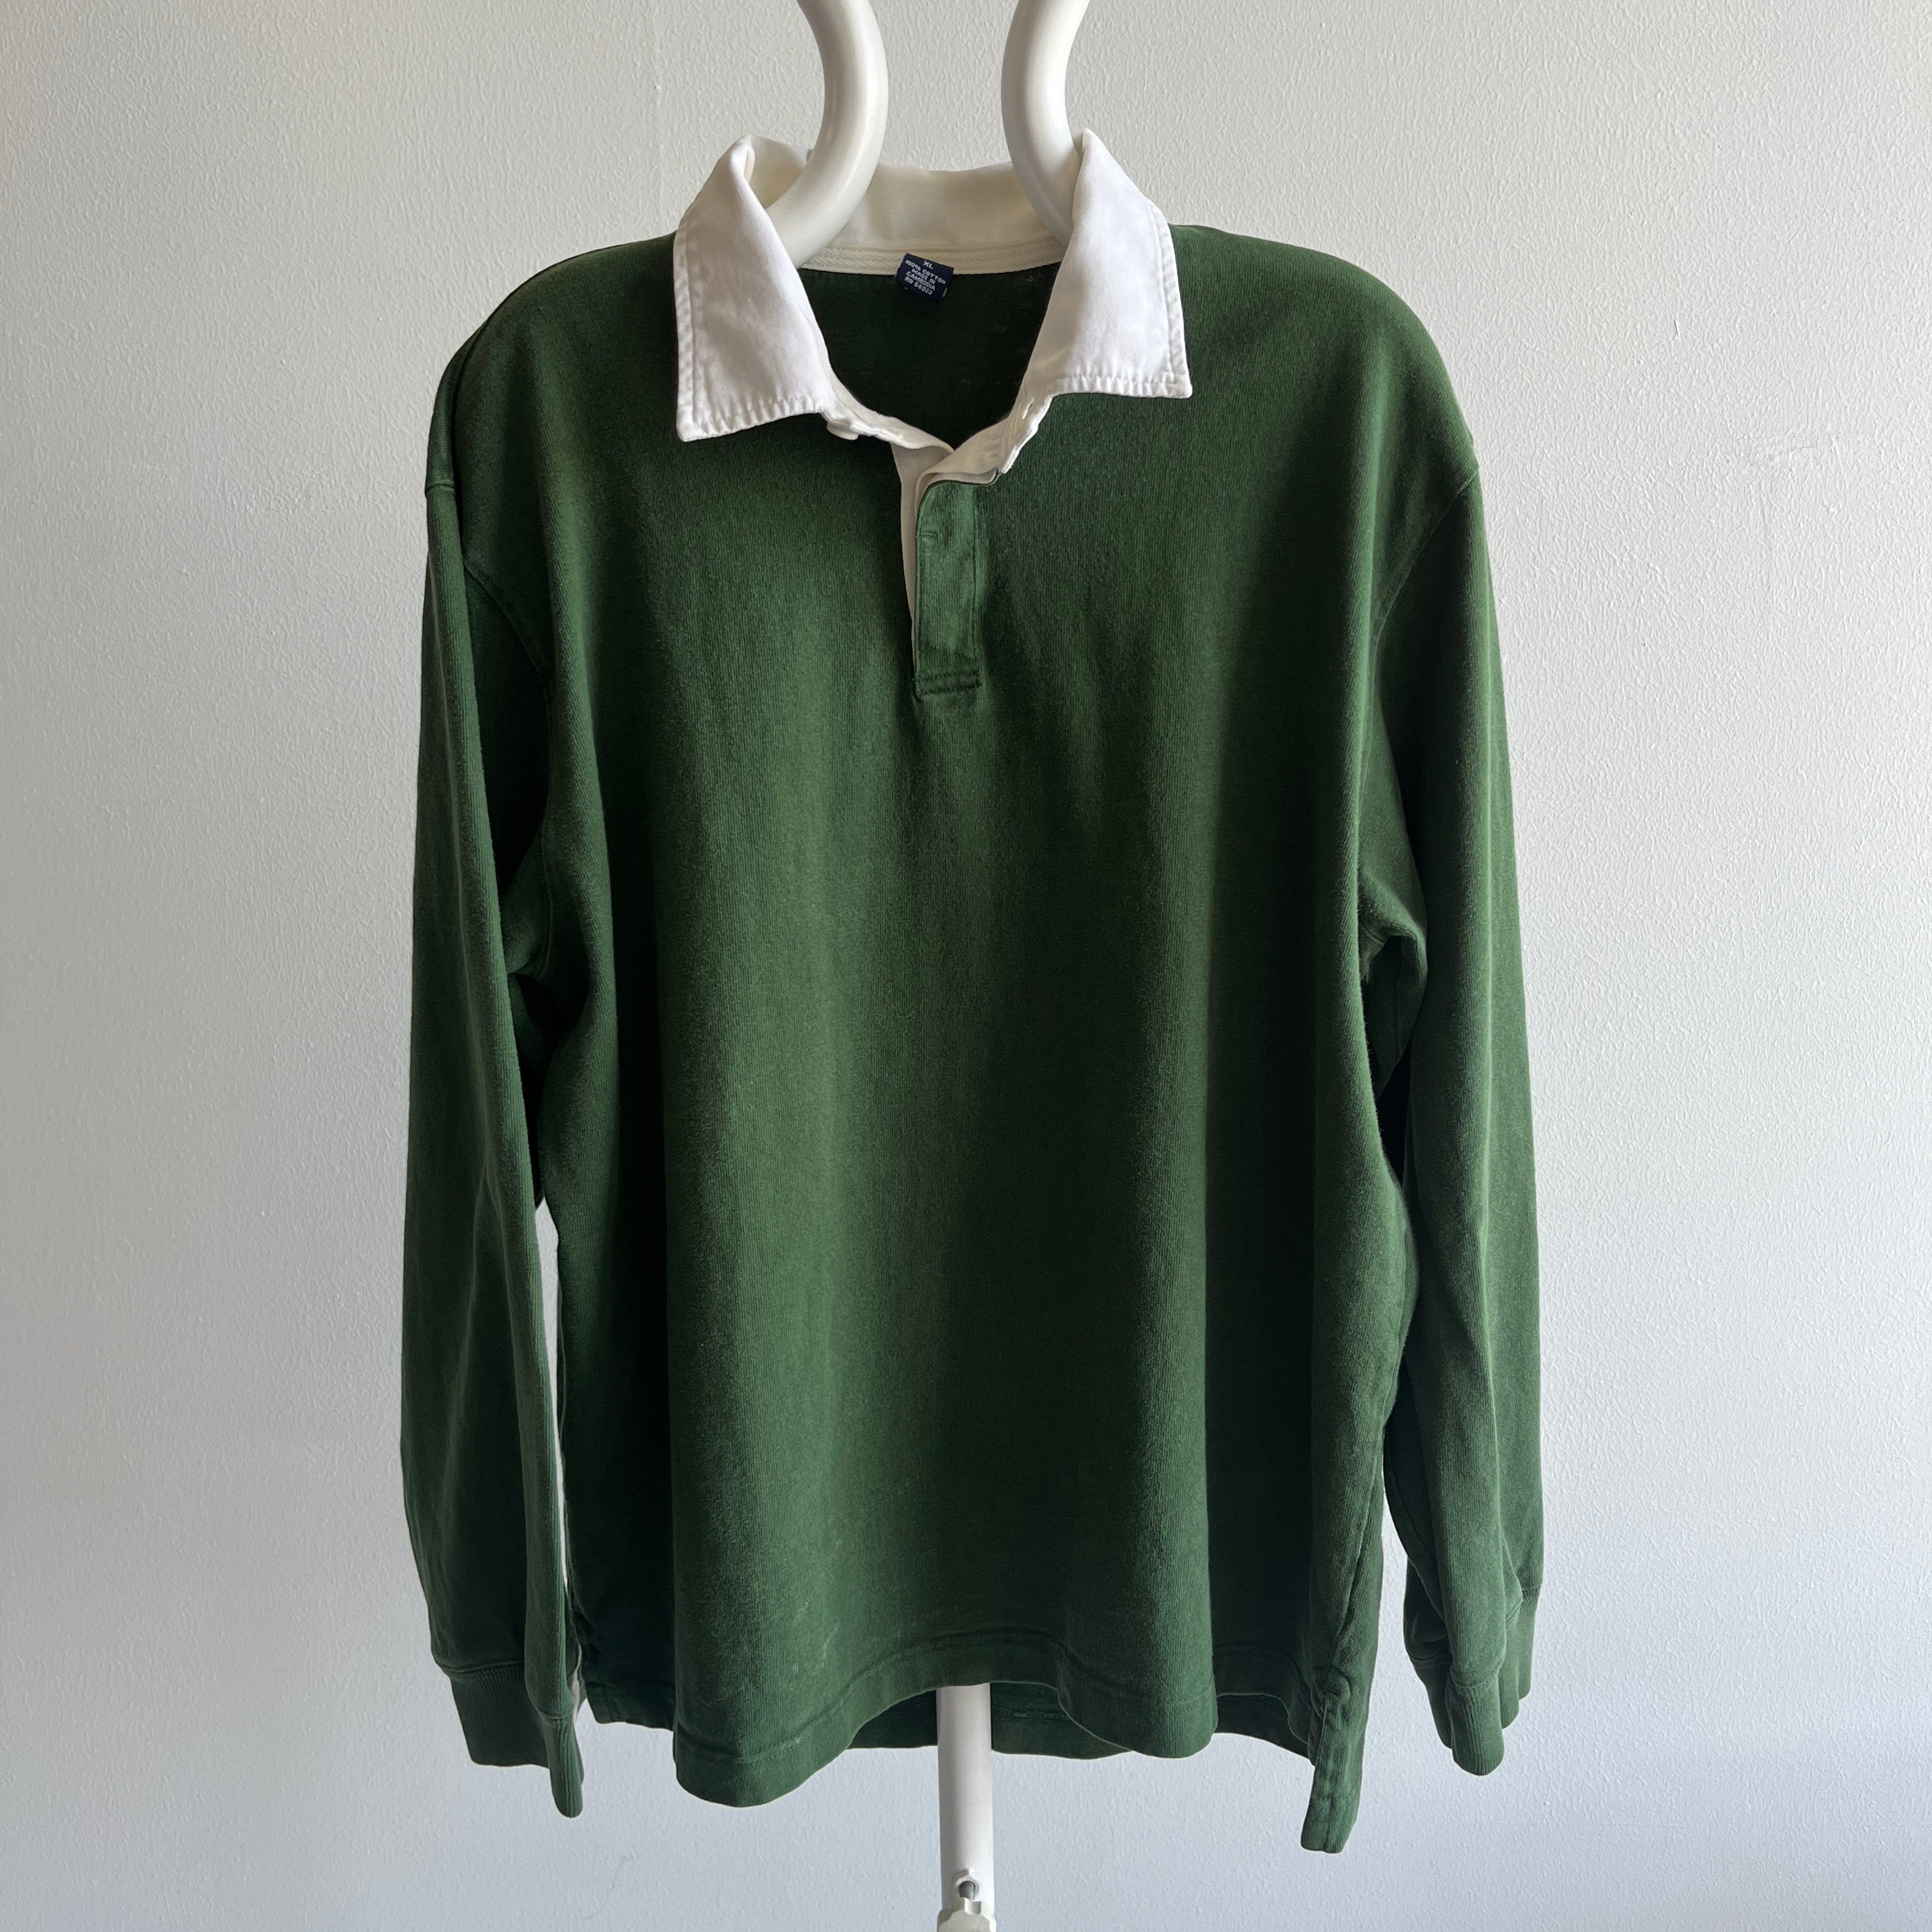 1990/2000s Hunter/Forest/Faded Green Gap Heavyweight Cotton Rugby Shirt